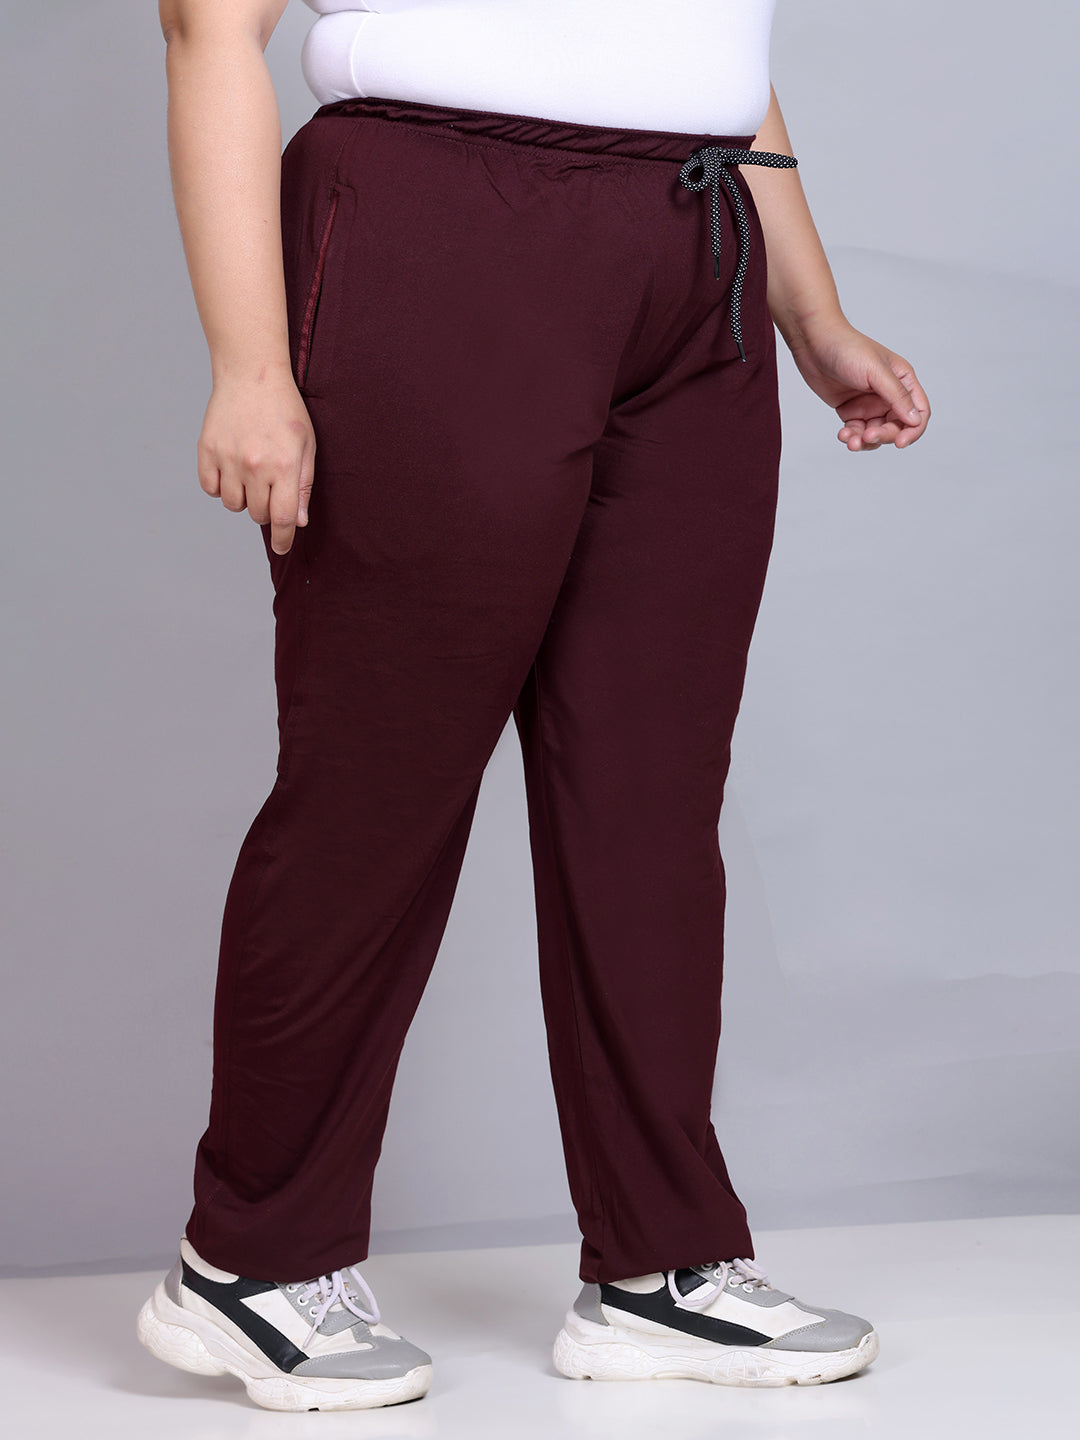 Comfy Wine Cotton Track Pants For Women At Best Prices